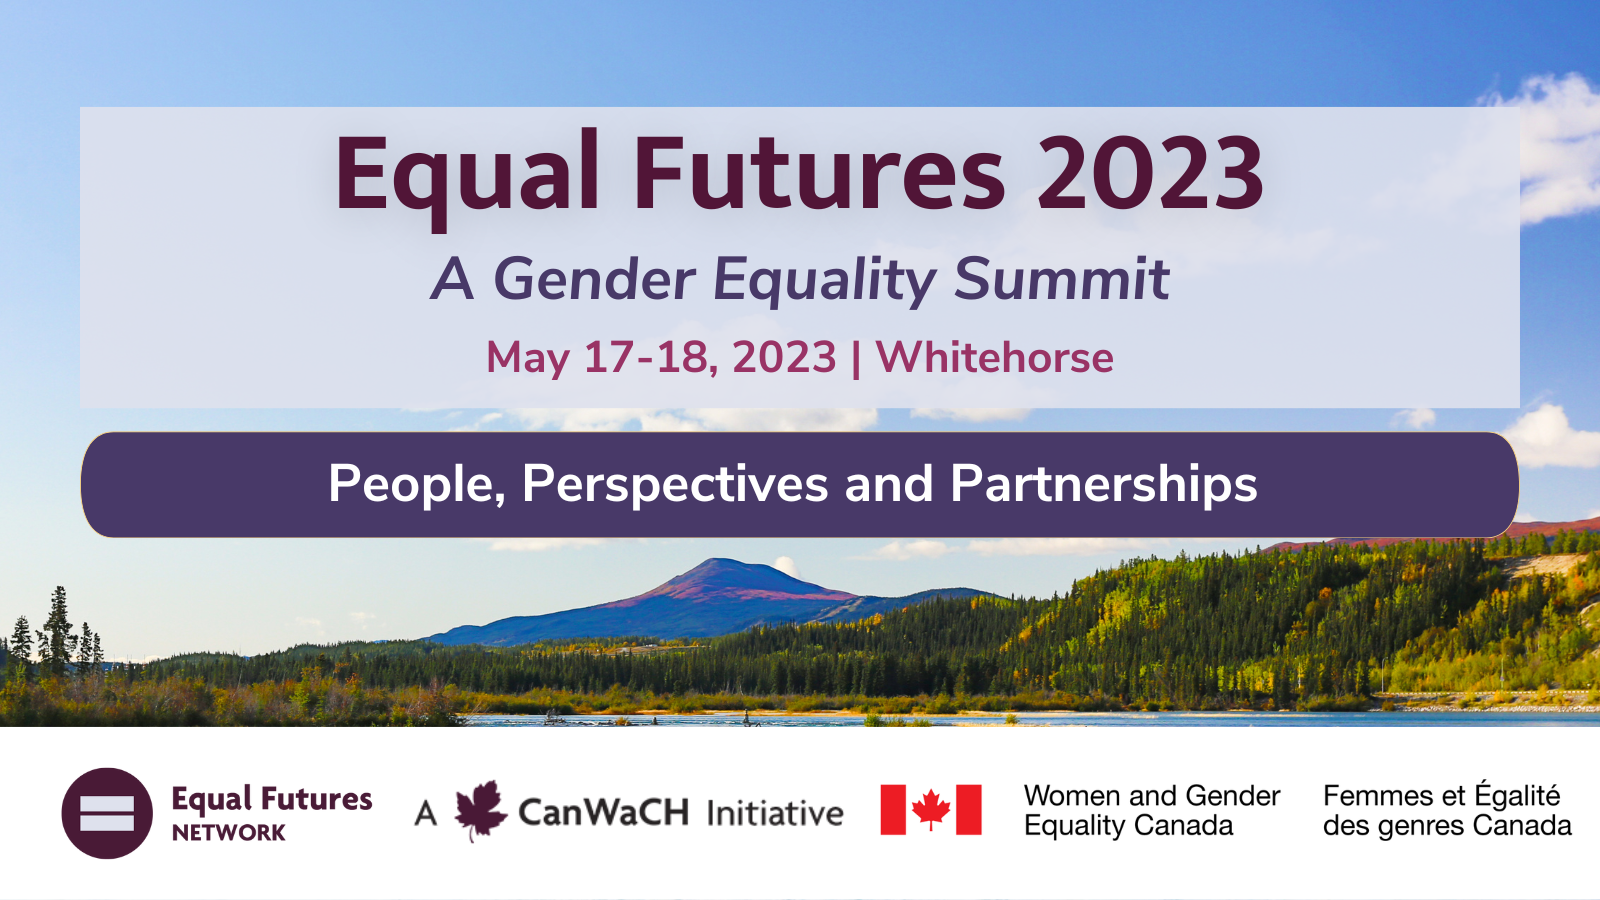 The Equal Futures Network is pleased to announce the theme for the Equal Futures 2023 Summit: People, Perspectives and Partnerships